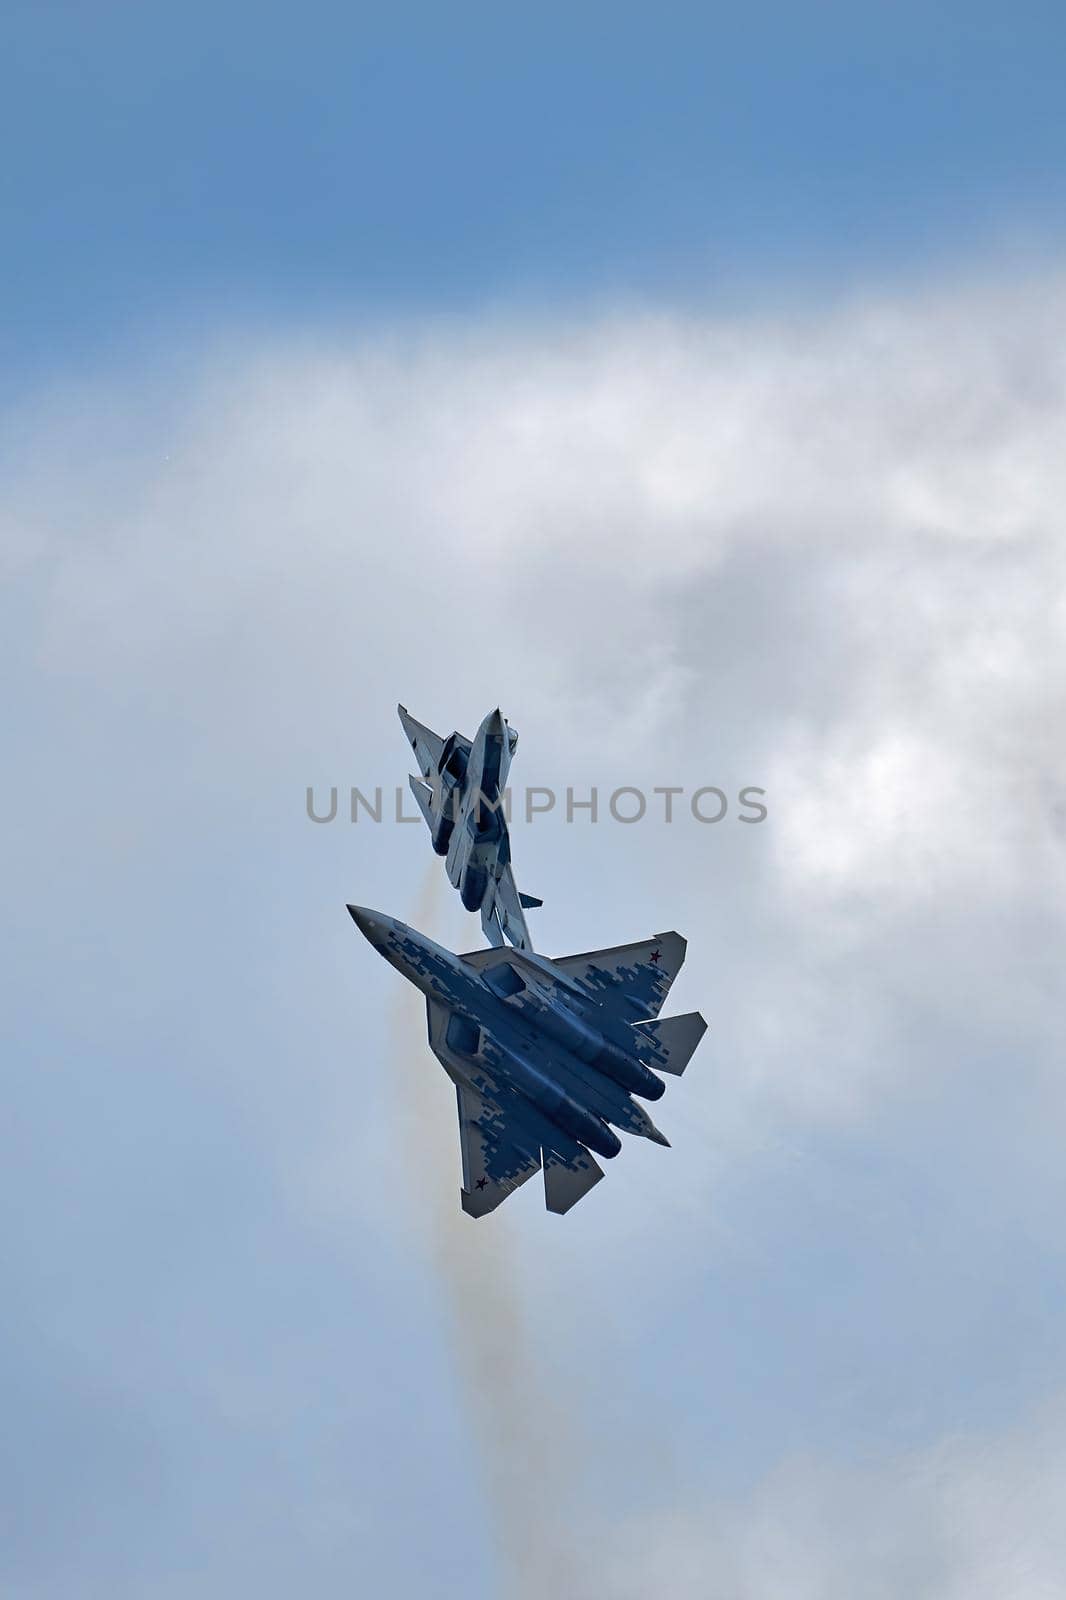 New Russian five generation's fighters SU 57, T-50 shows aerial maneuver battle at Moscow International Aviation and Space Salon MAKS 2019. RUSSIA, AUGUST 28, 2019 by EvgeniyQW